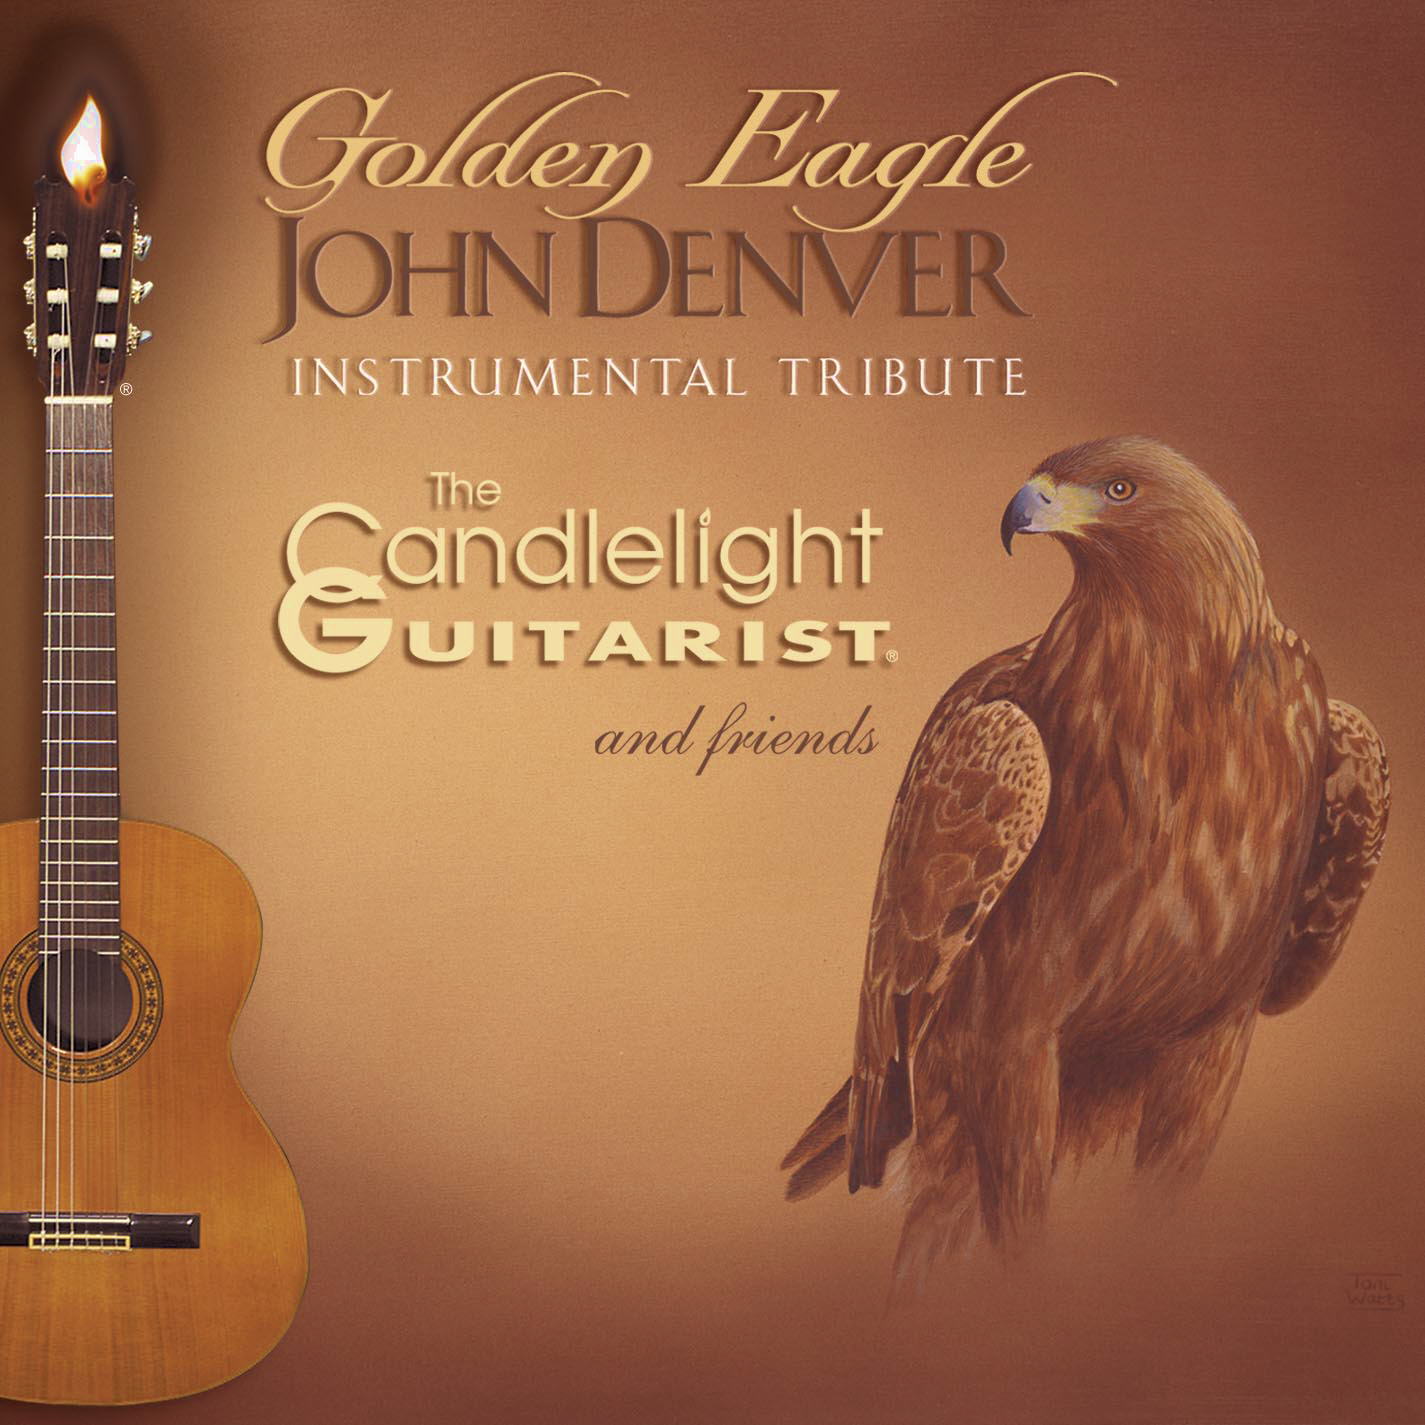 Golden Eagle: John Denver Instrumental Tribute by The Candlelight Guitarist CD cover - CLICK FOR MORE INFO